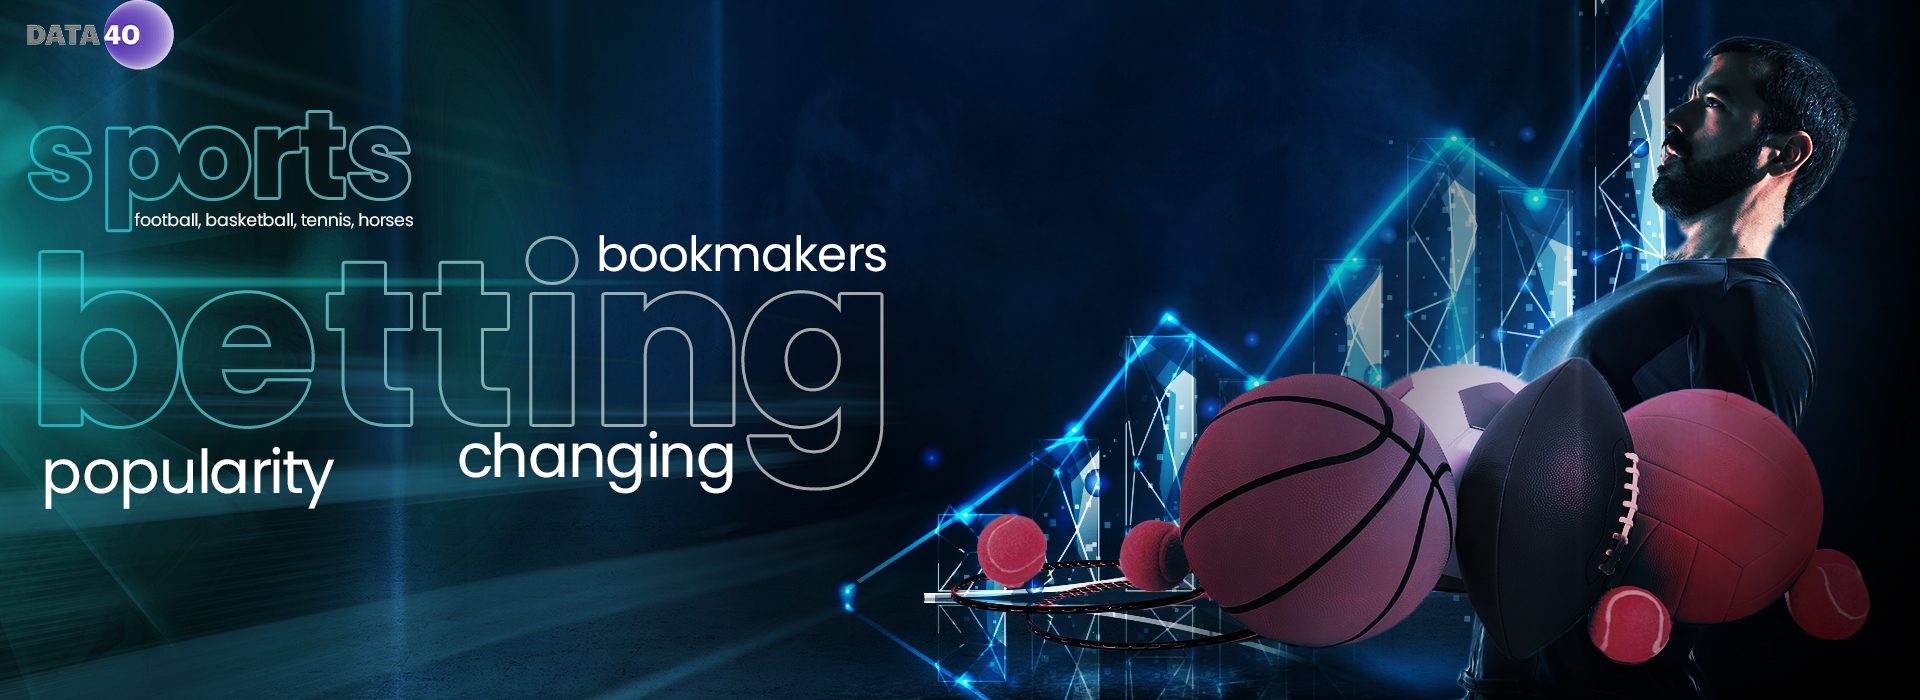 Bookmakers betting popularity changing